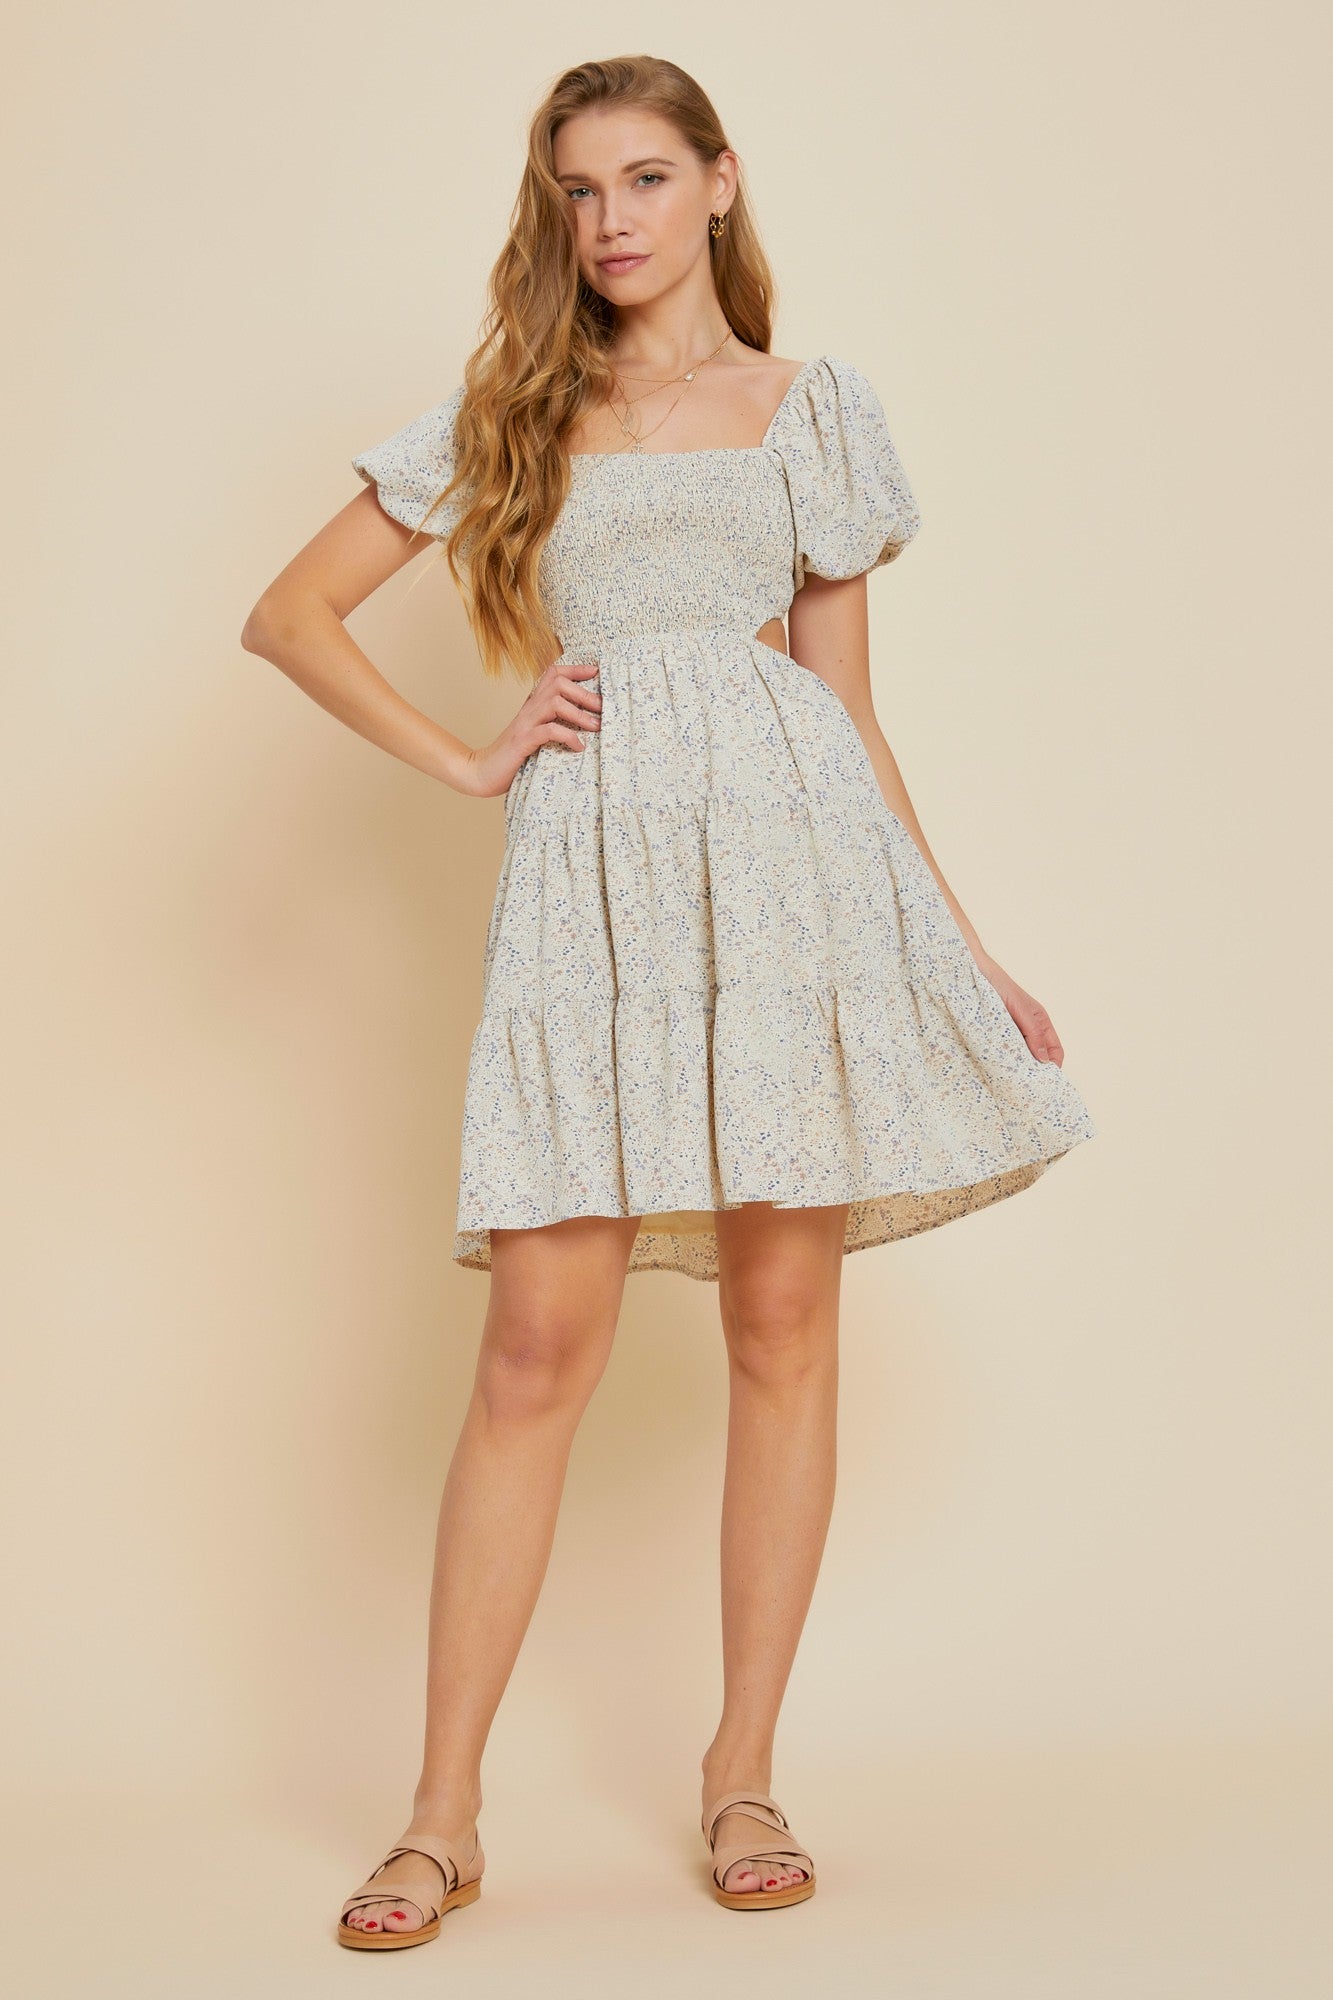 Women's High Neck Embroidered Mini Dress in Cream Floral